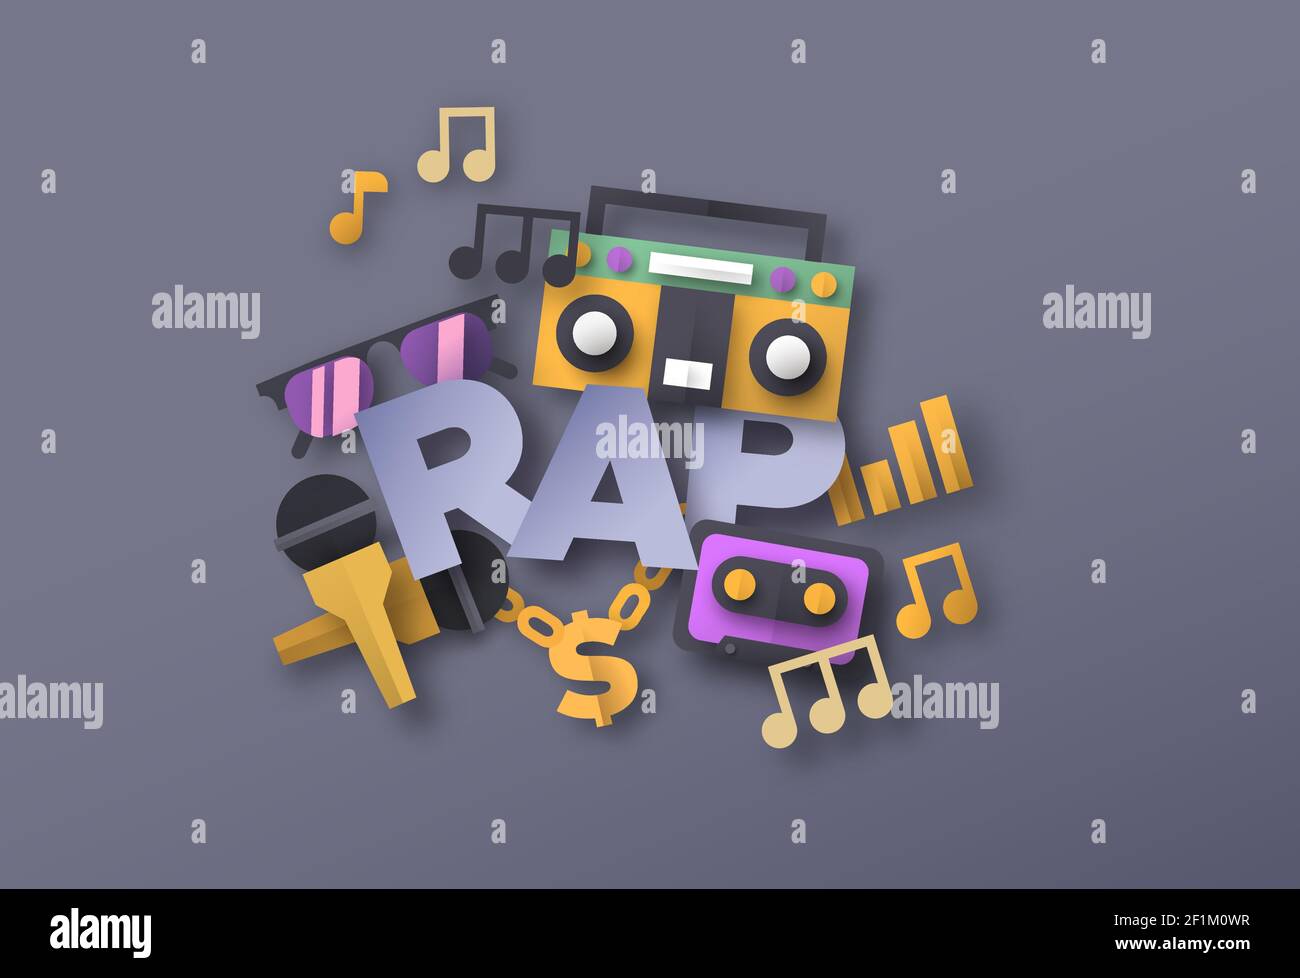 Rap music style illustration with 3d paper cut musical equipment icons. Urban rapper battle event or street sound concept. Includes microphone, gold c Stock Vector